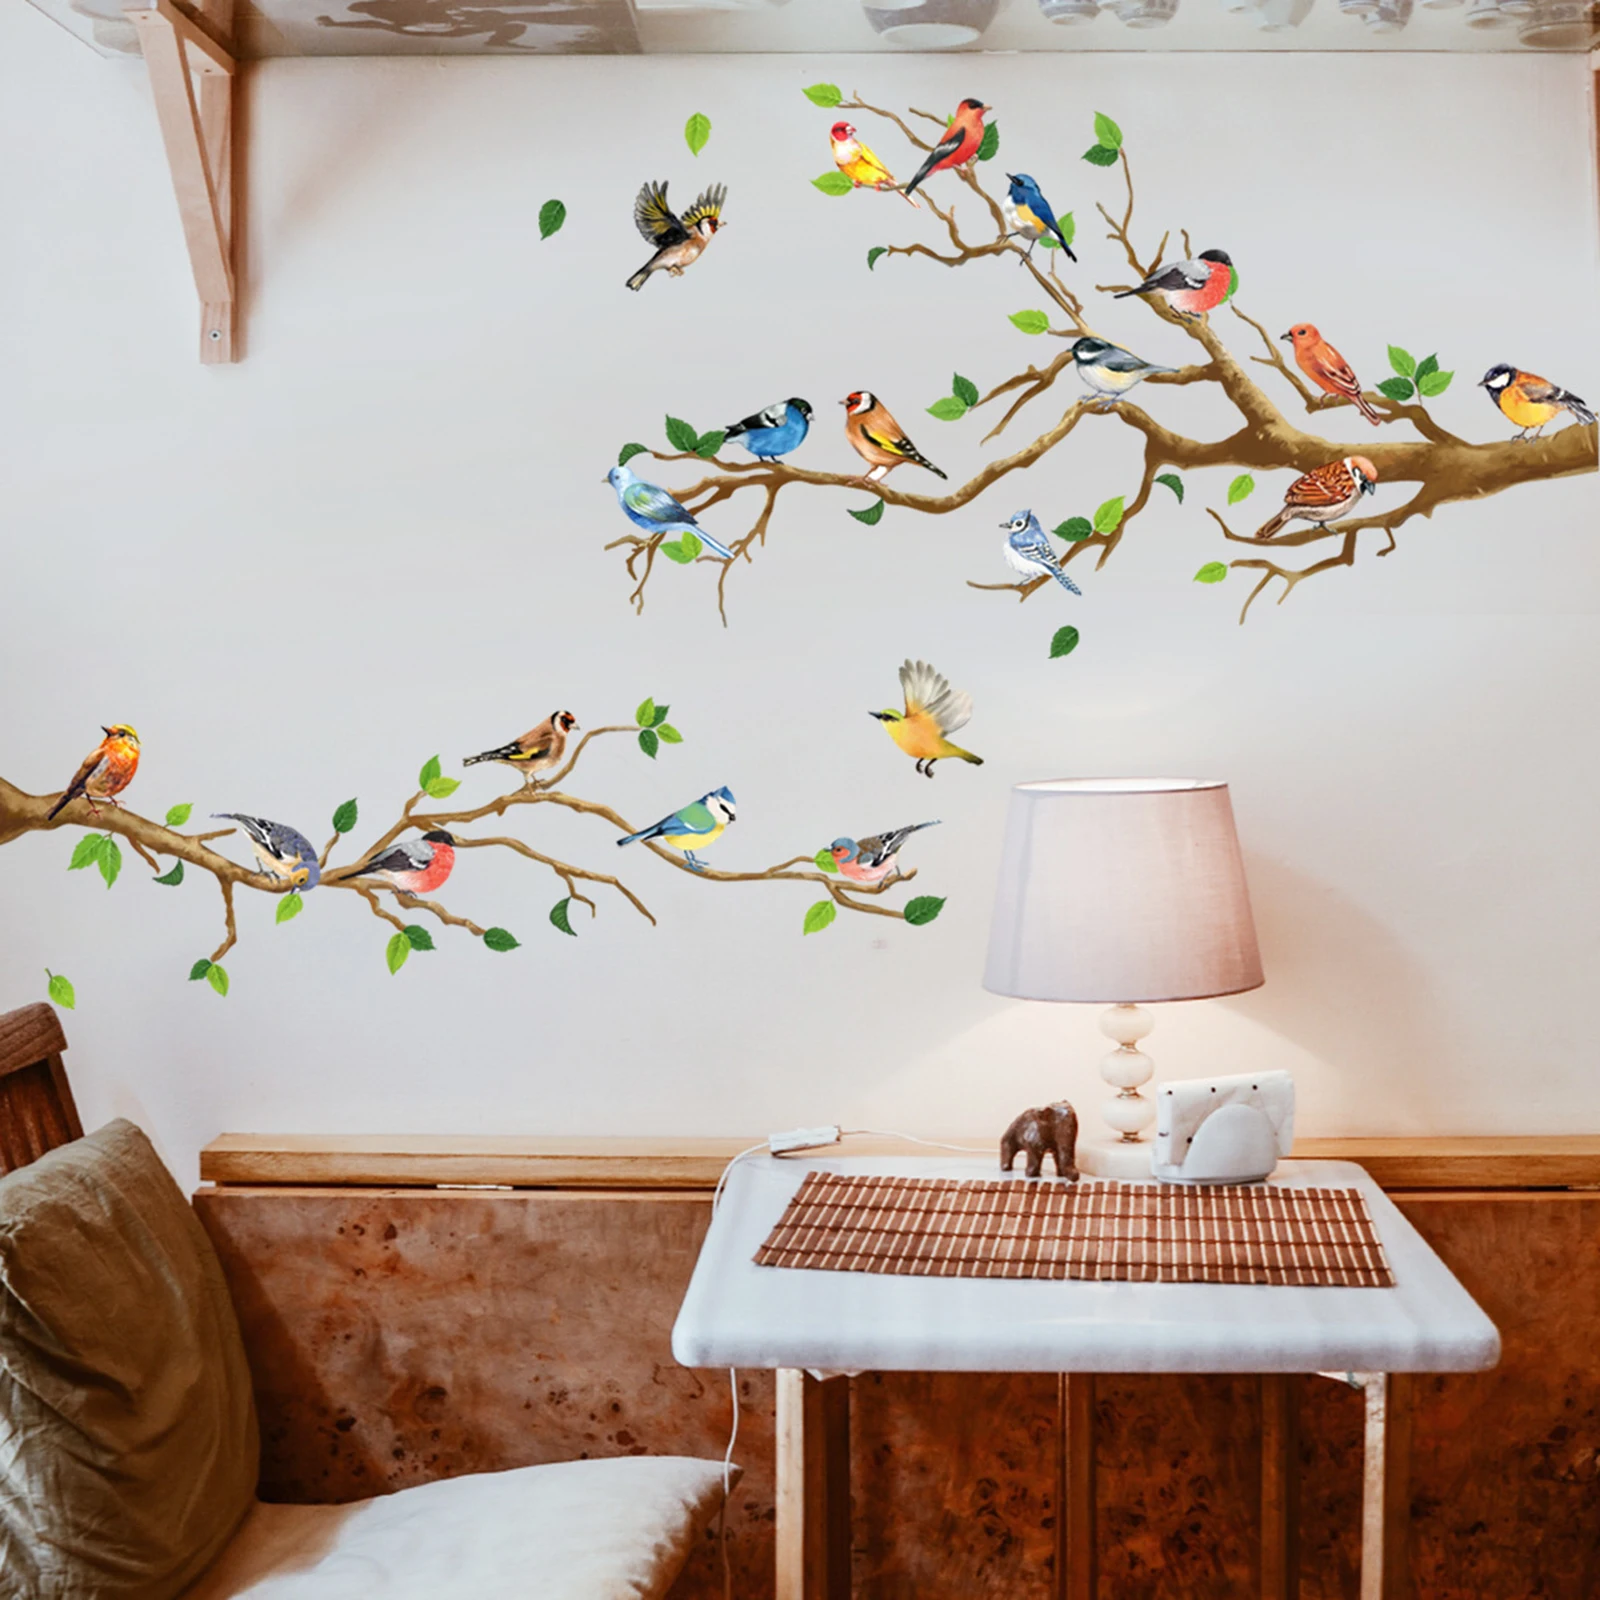 Branch Birds Wall Stickers Home Office Background Bedroom Shcool Magnolia  Flower For Living Room Self adhesive Wallpaper|Wall Stickers| - AliExpress